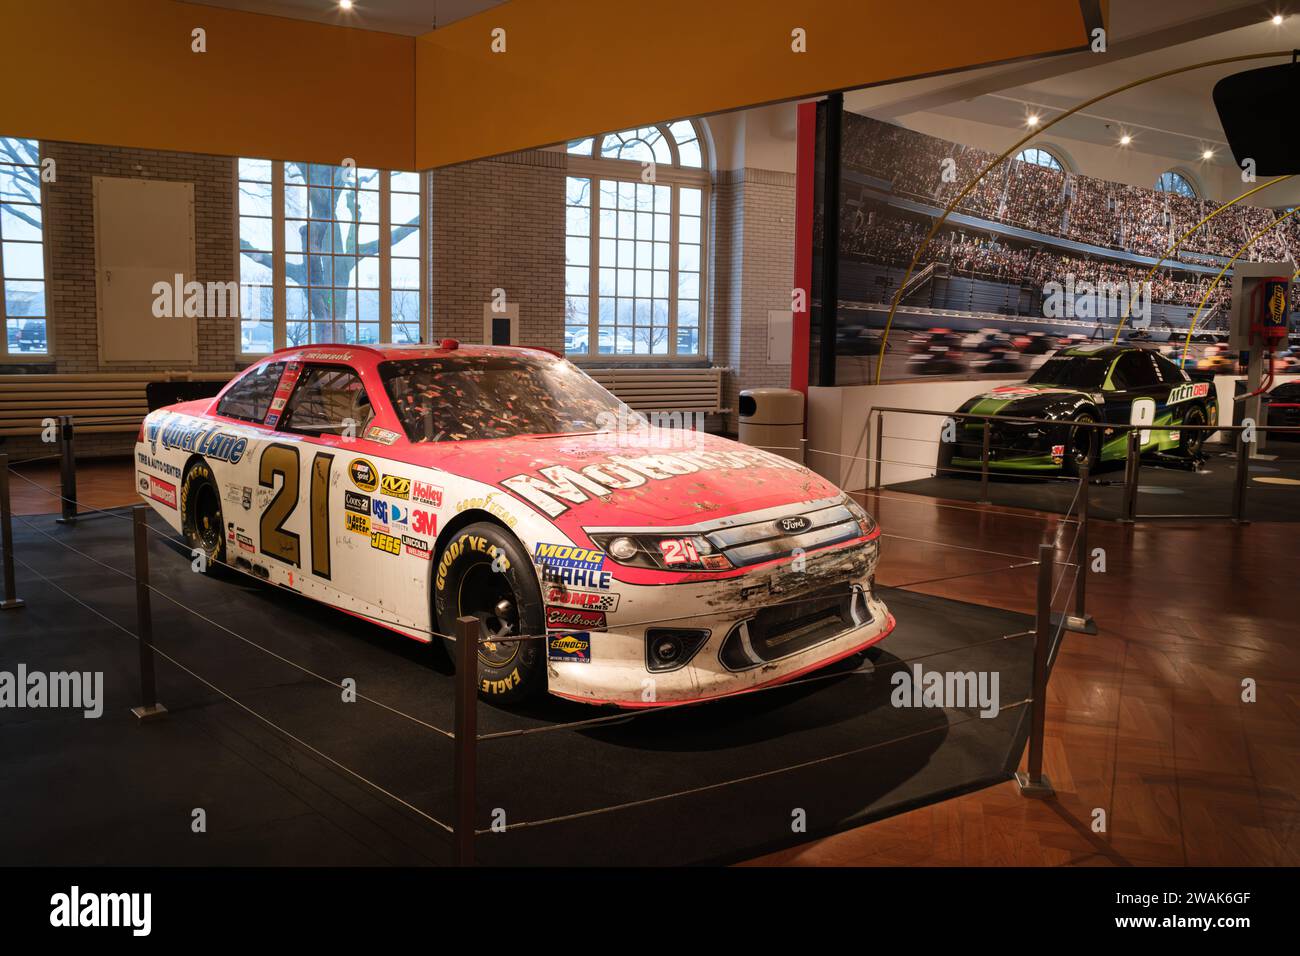 Ford Fusion NASCAR cup car, driven to the 2011 Daytona 500 win by Trevor Bayne, on display at the Henry Ford Museum of American Innovation Stock Photo